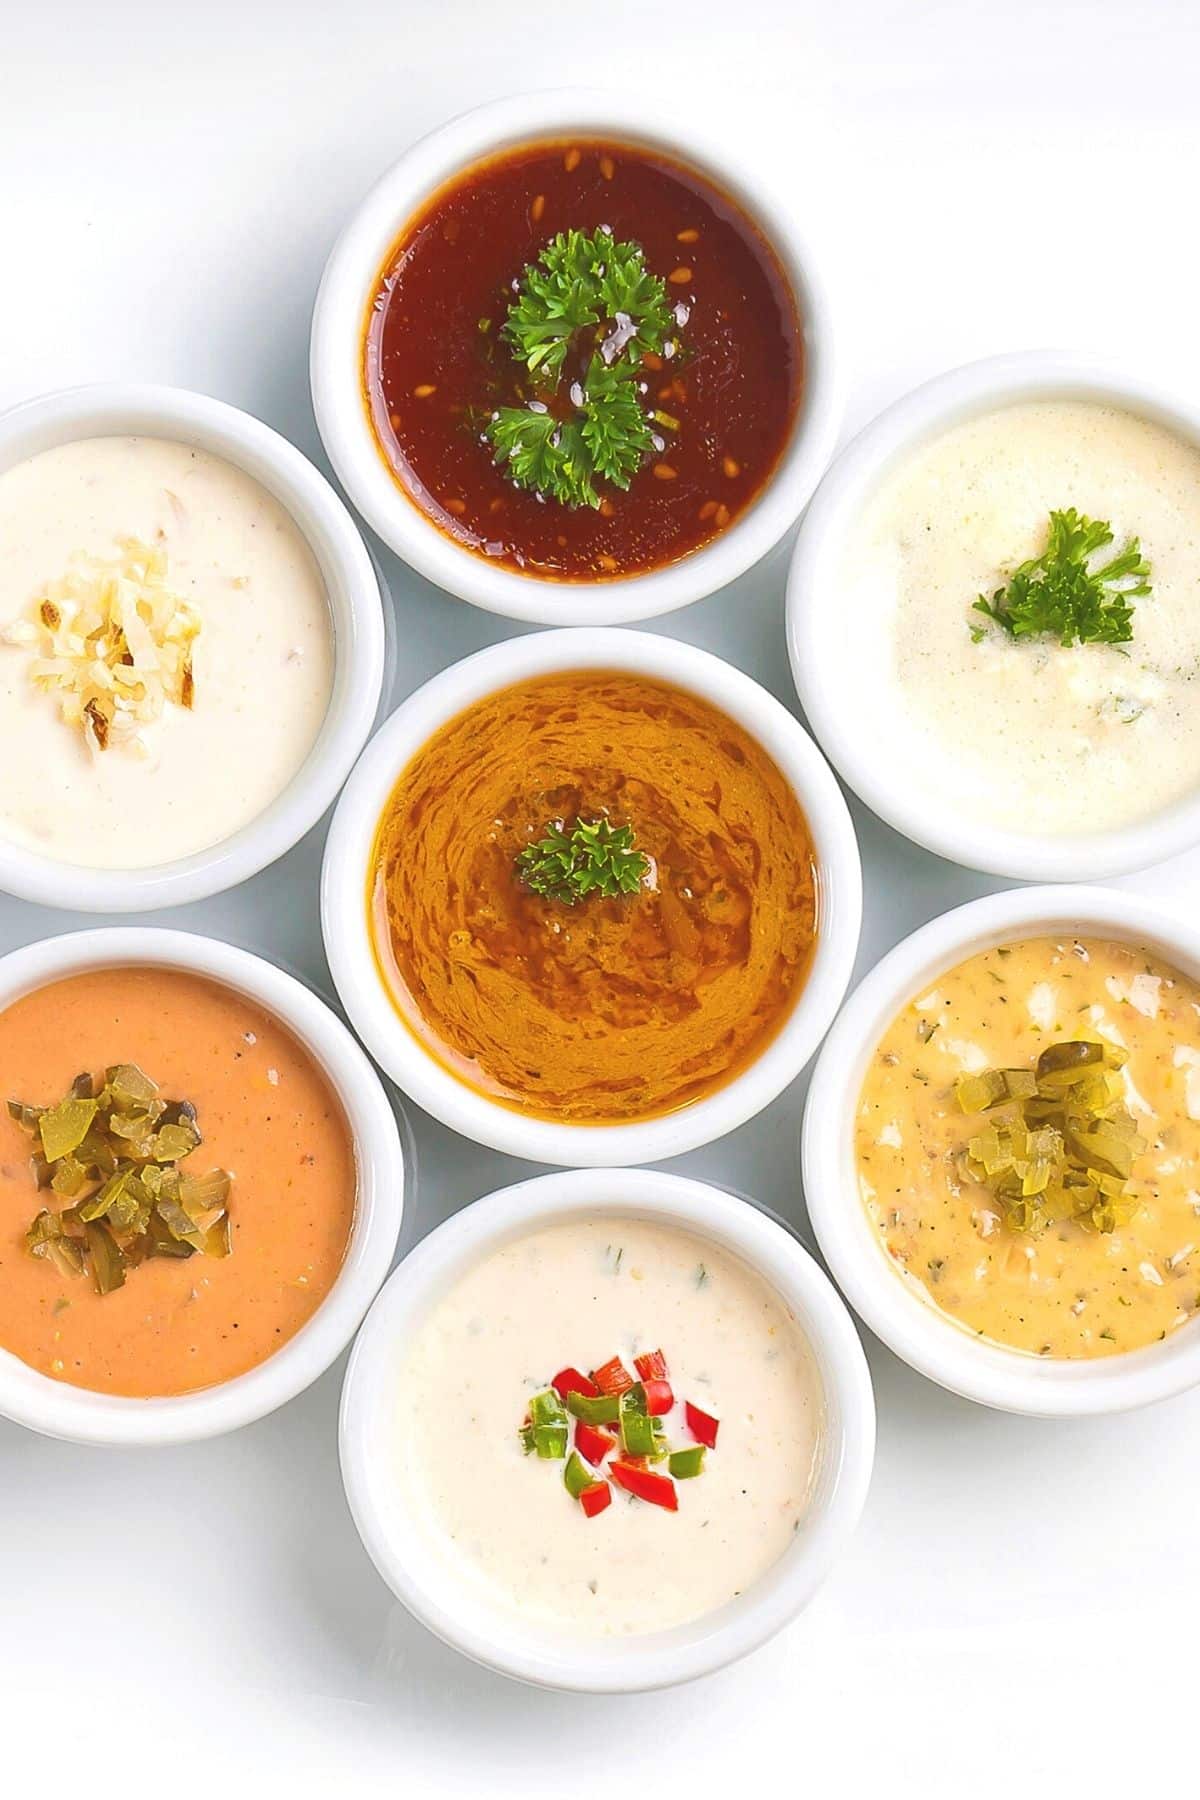 Bowls of different gluten free sauces on table.